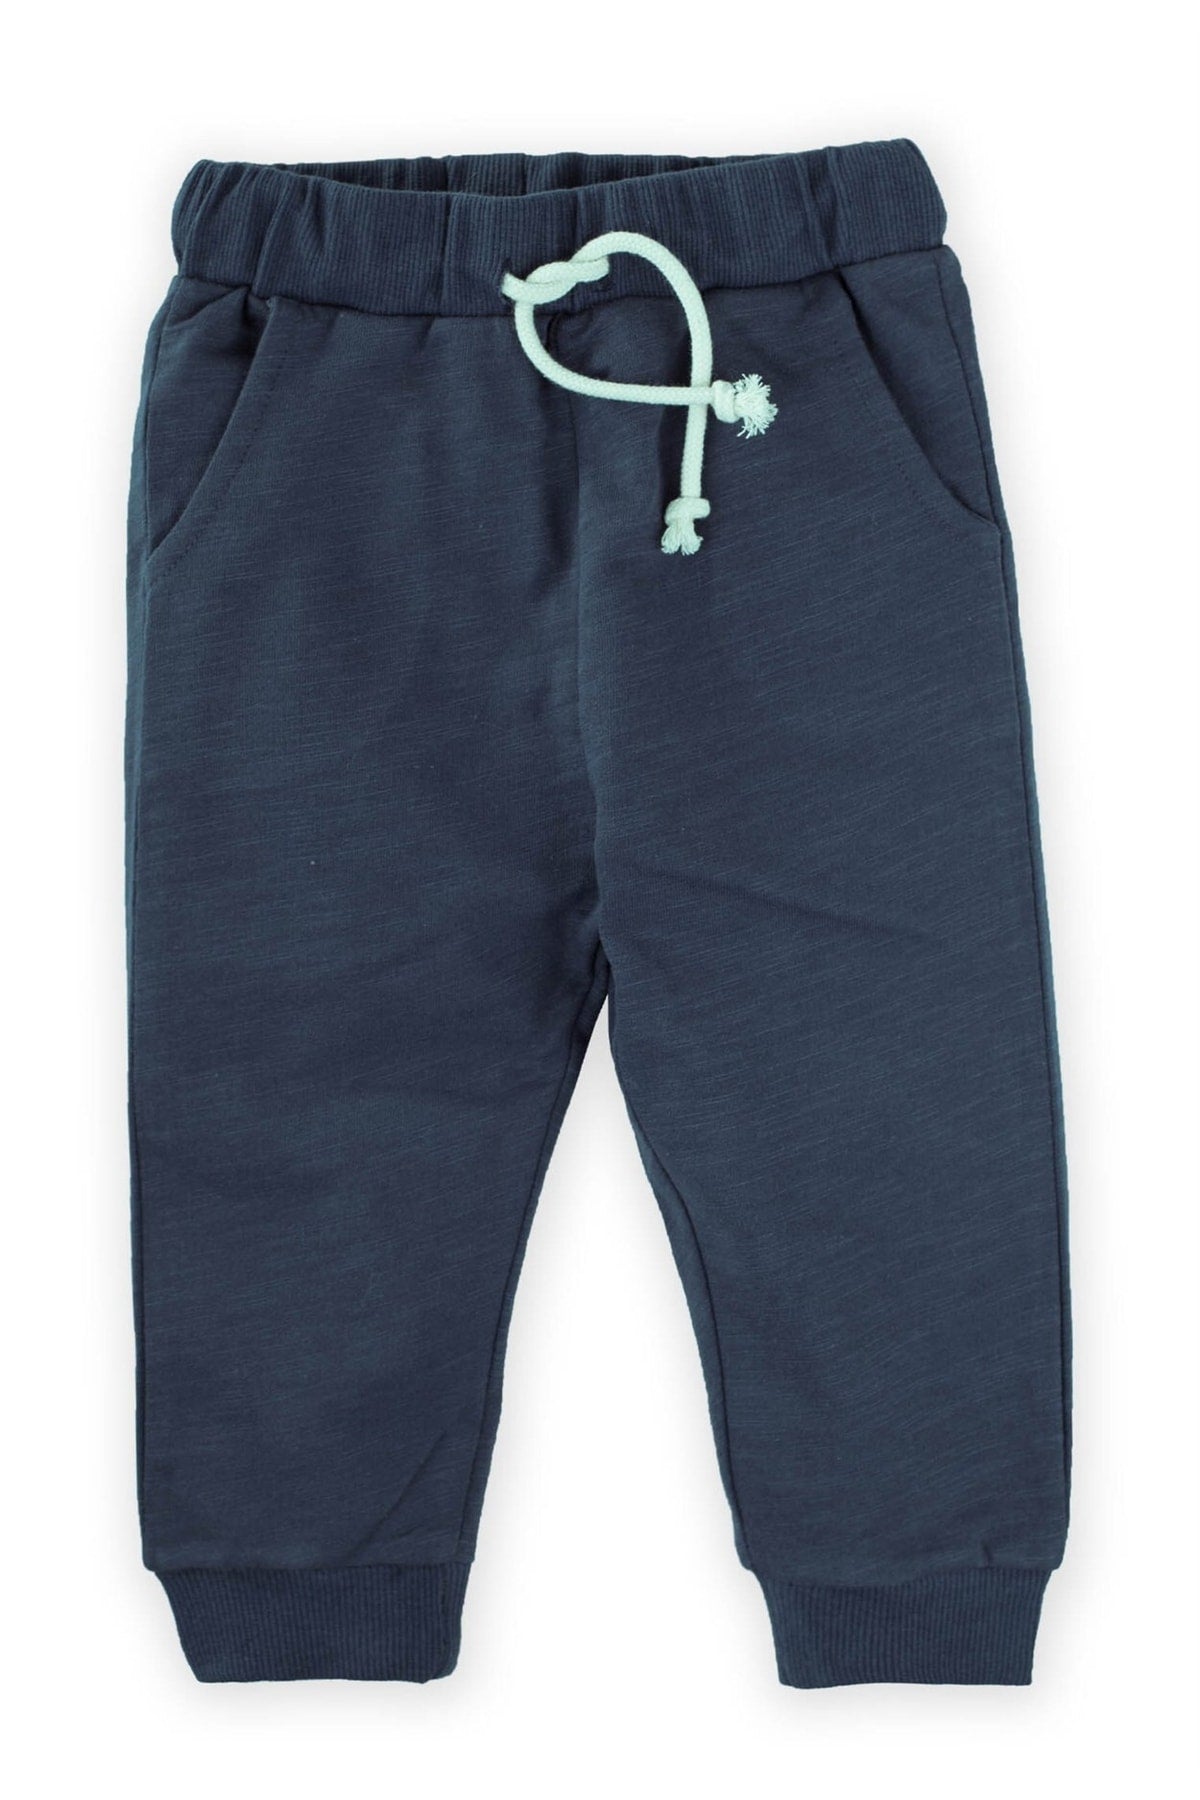 Pocket tracksuit 1-9 years old navy blue